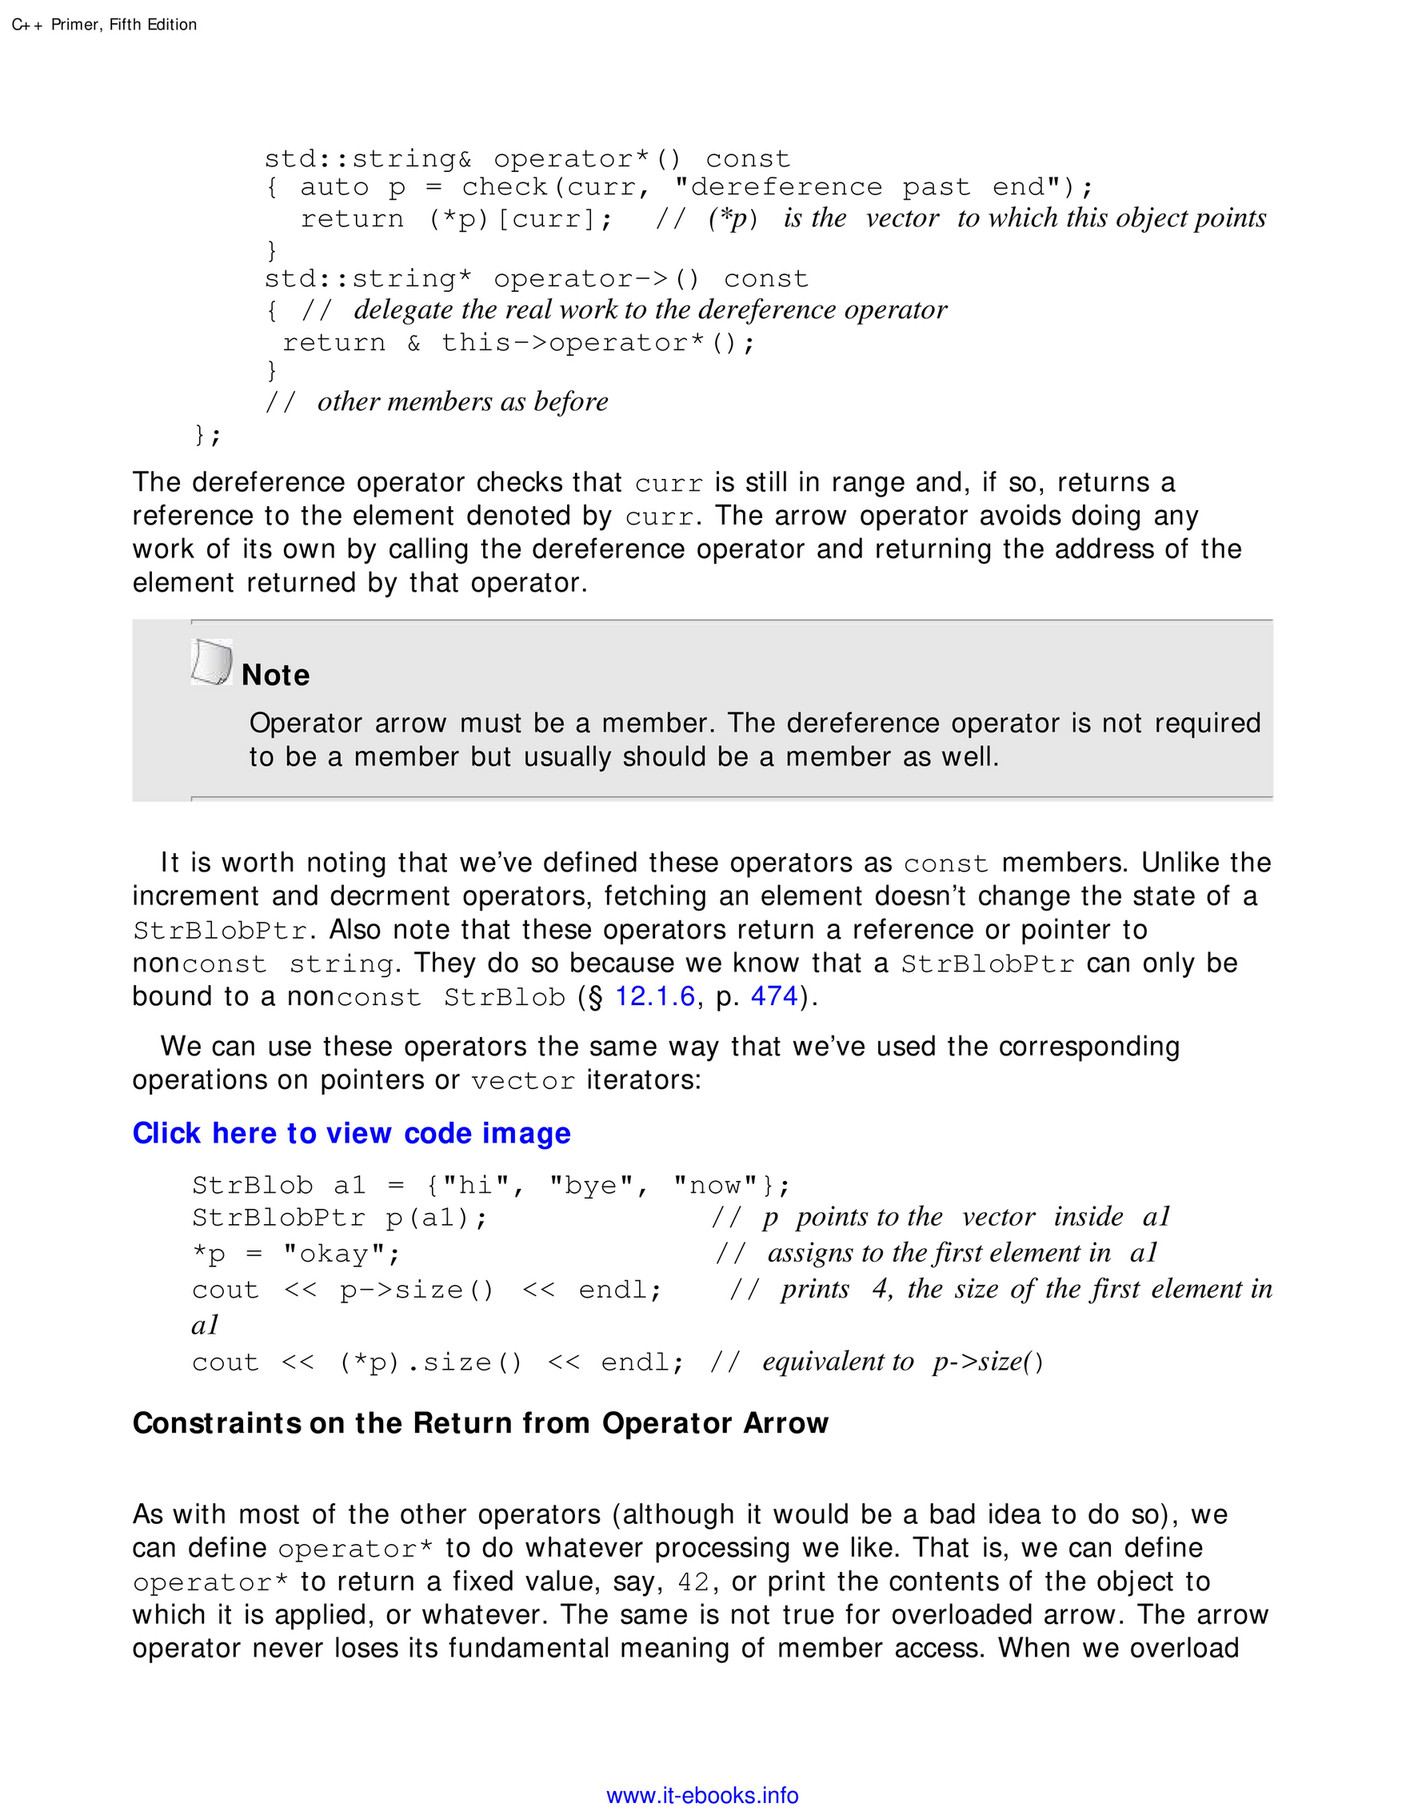 My publications - C++ Primer, 5th Edition - Page 706-707 - Created with  Publitas.com